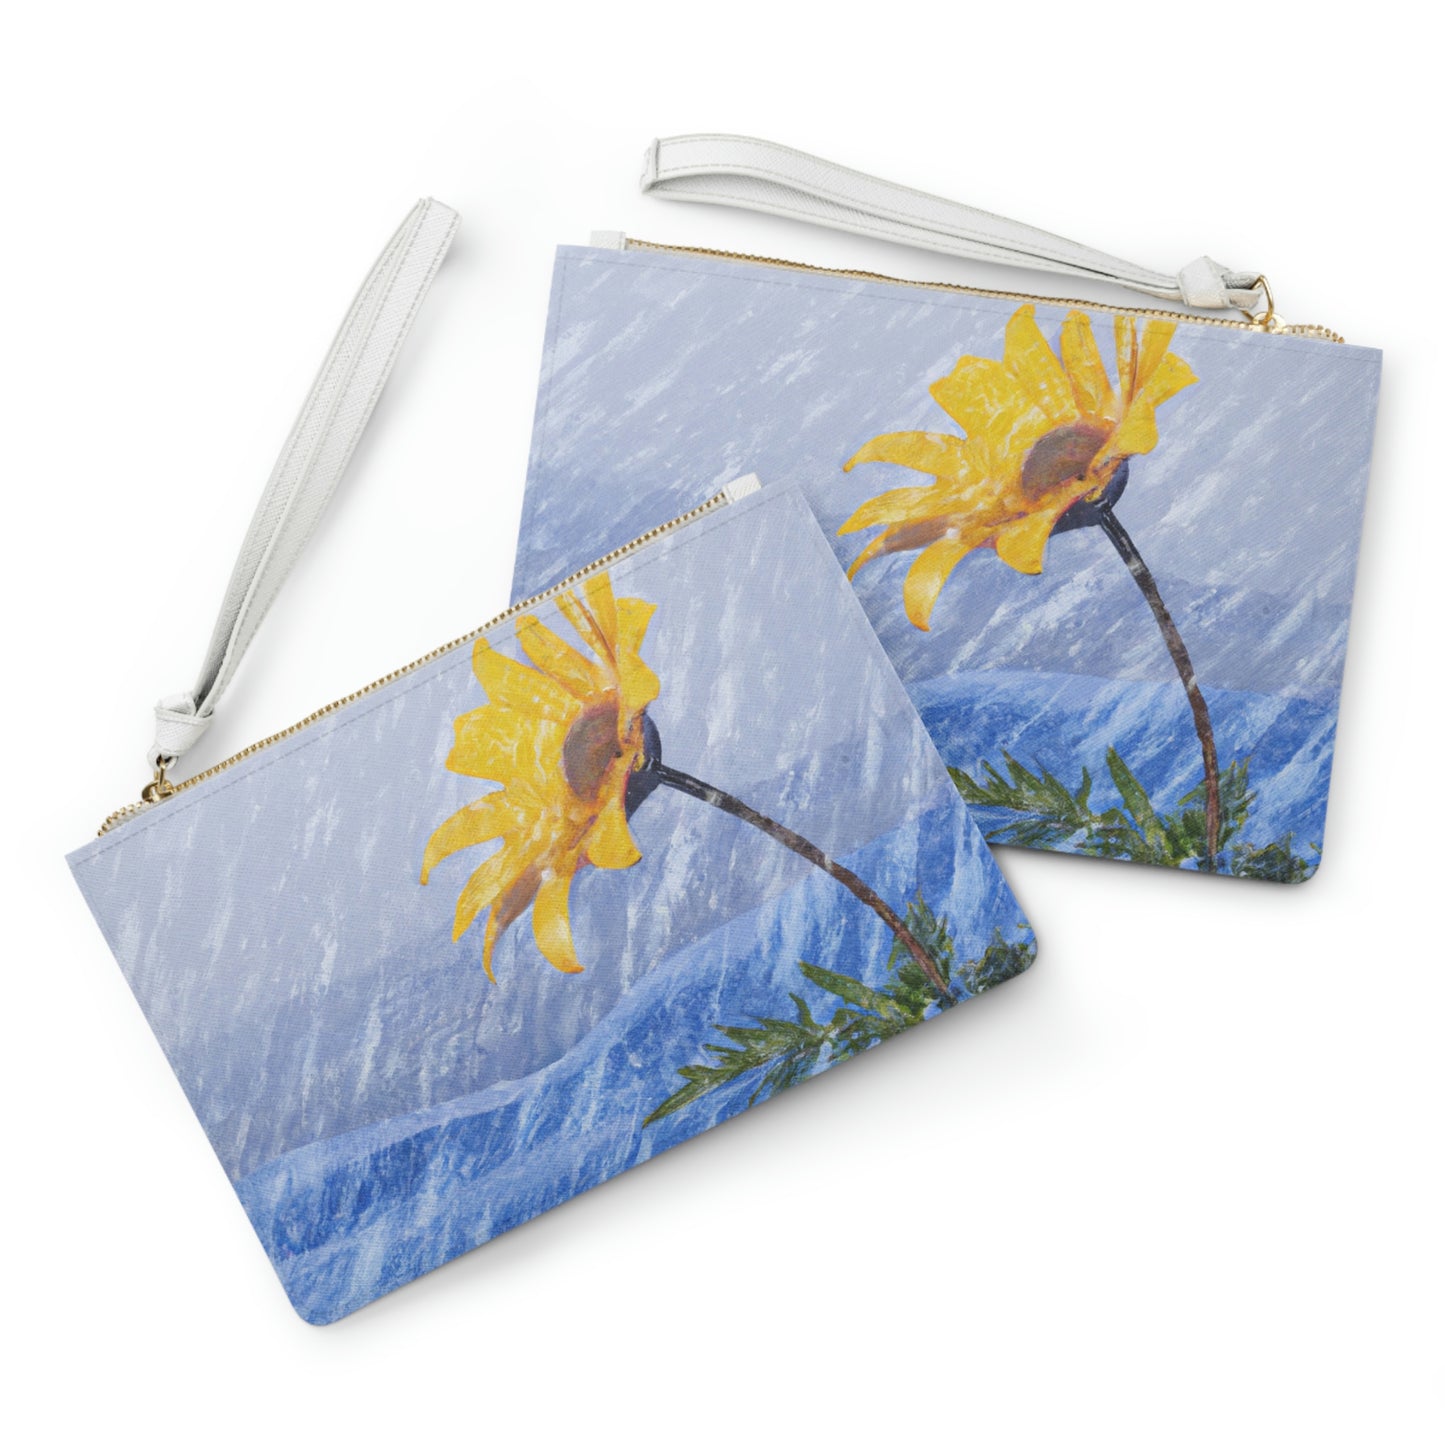 "A Burst of Color in the Glistening White: The Miracle of a Flower Blooms in a Snowstorm" - The Alien Clutch Bag